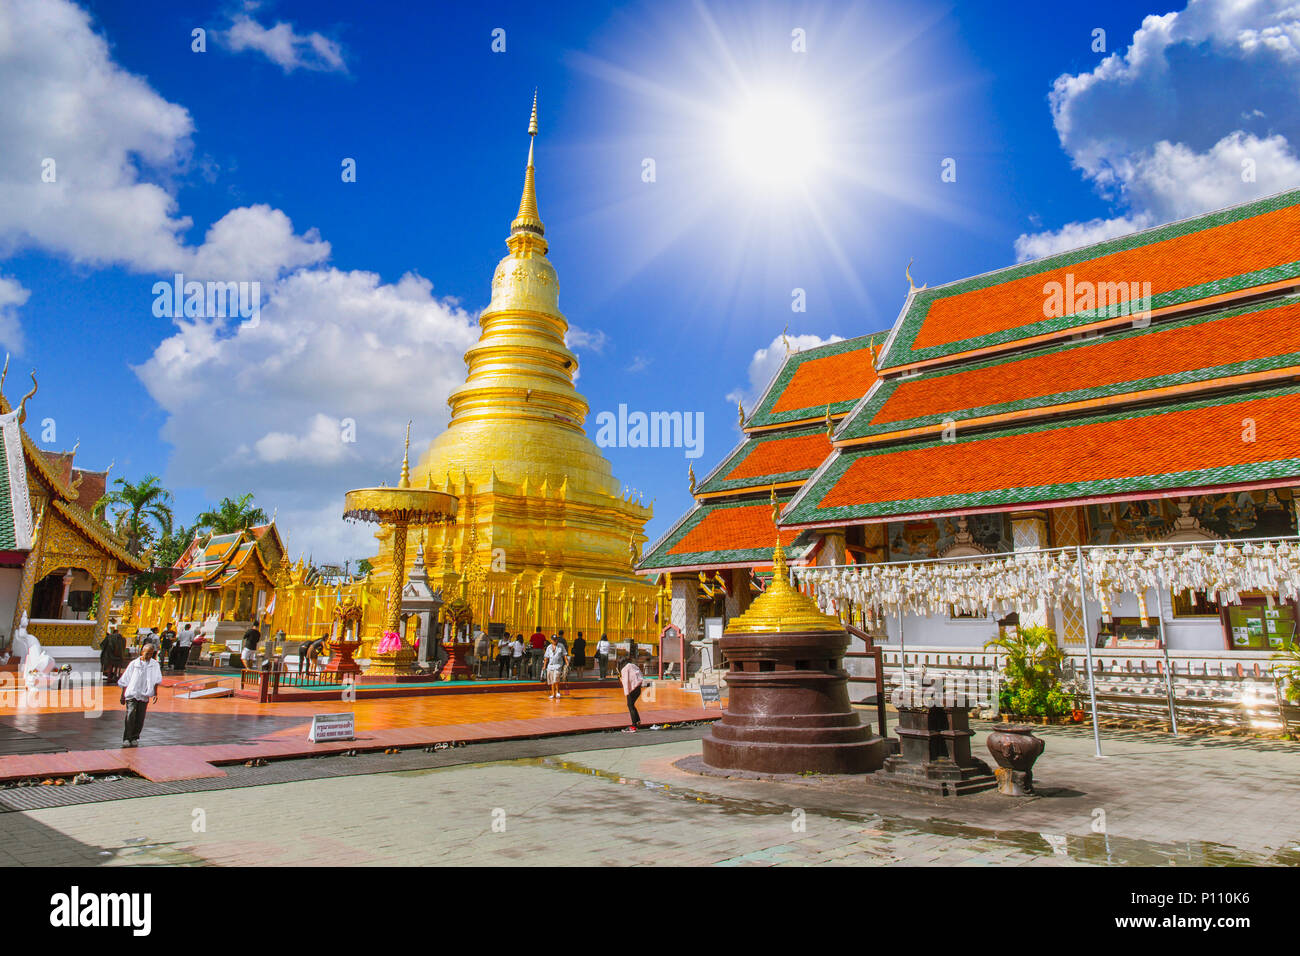 Wat phra that hariphunchai Temple lamphun Most beautiful and most popular travel destination Temple in North province at Lamphun Thailand 12 February  Stock Photo